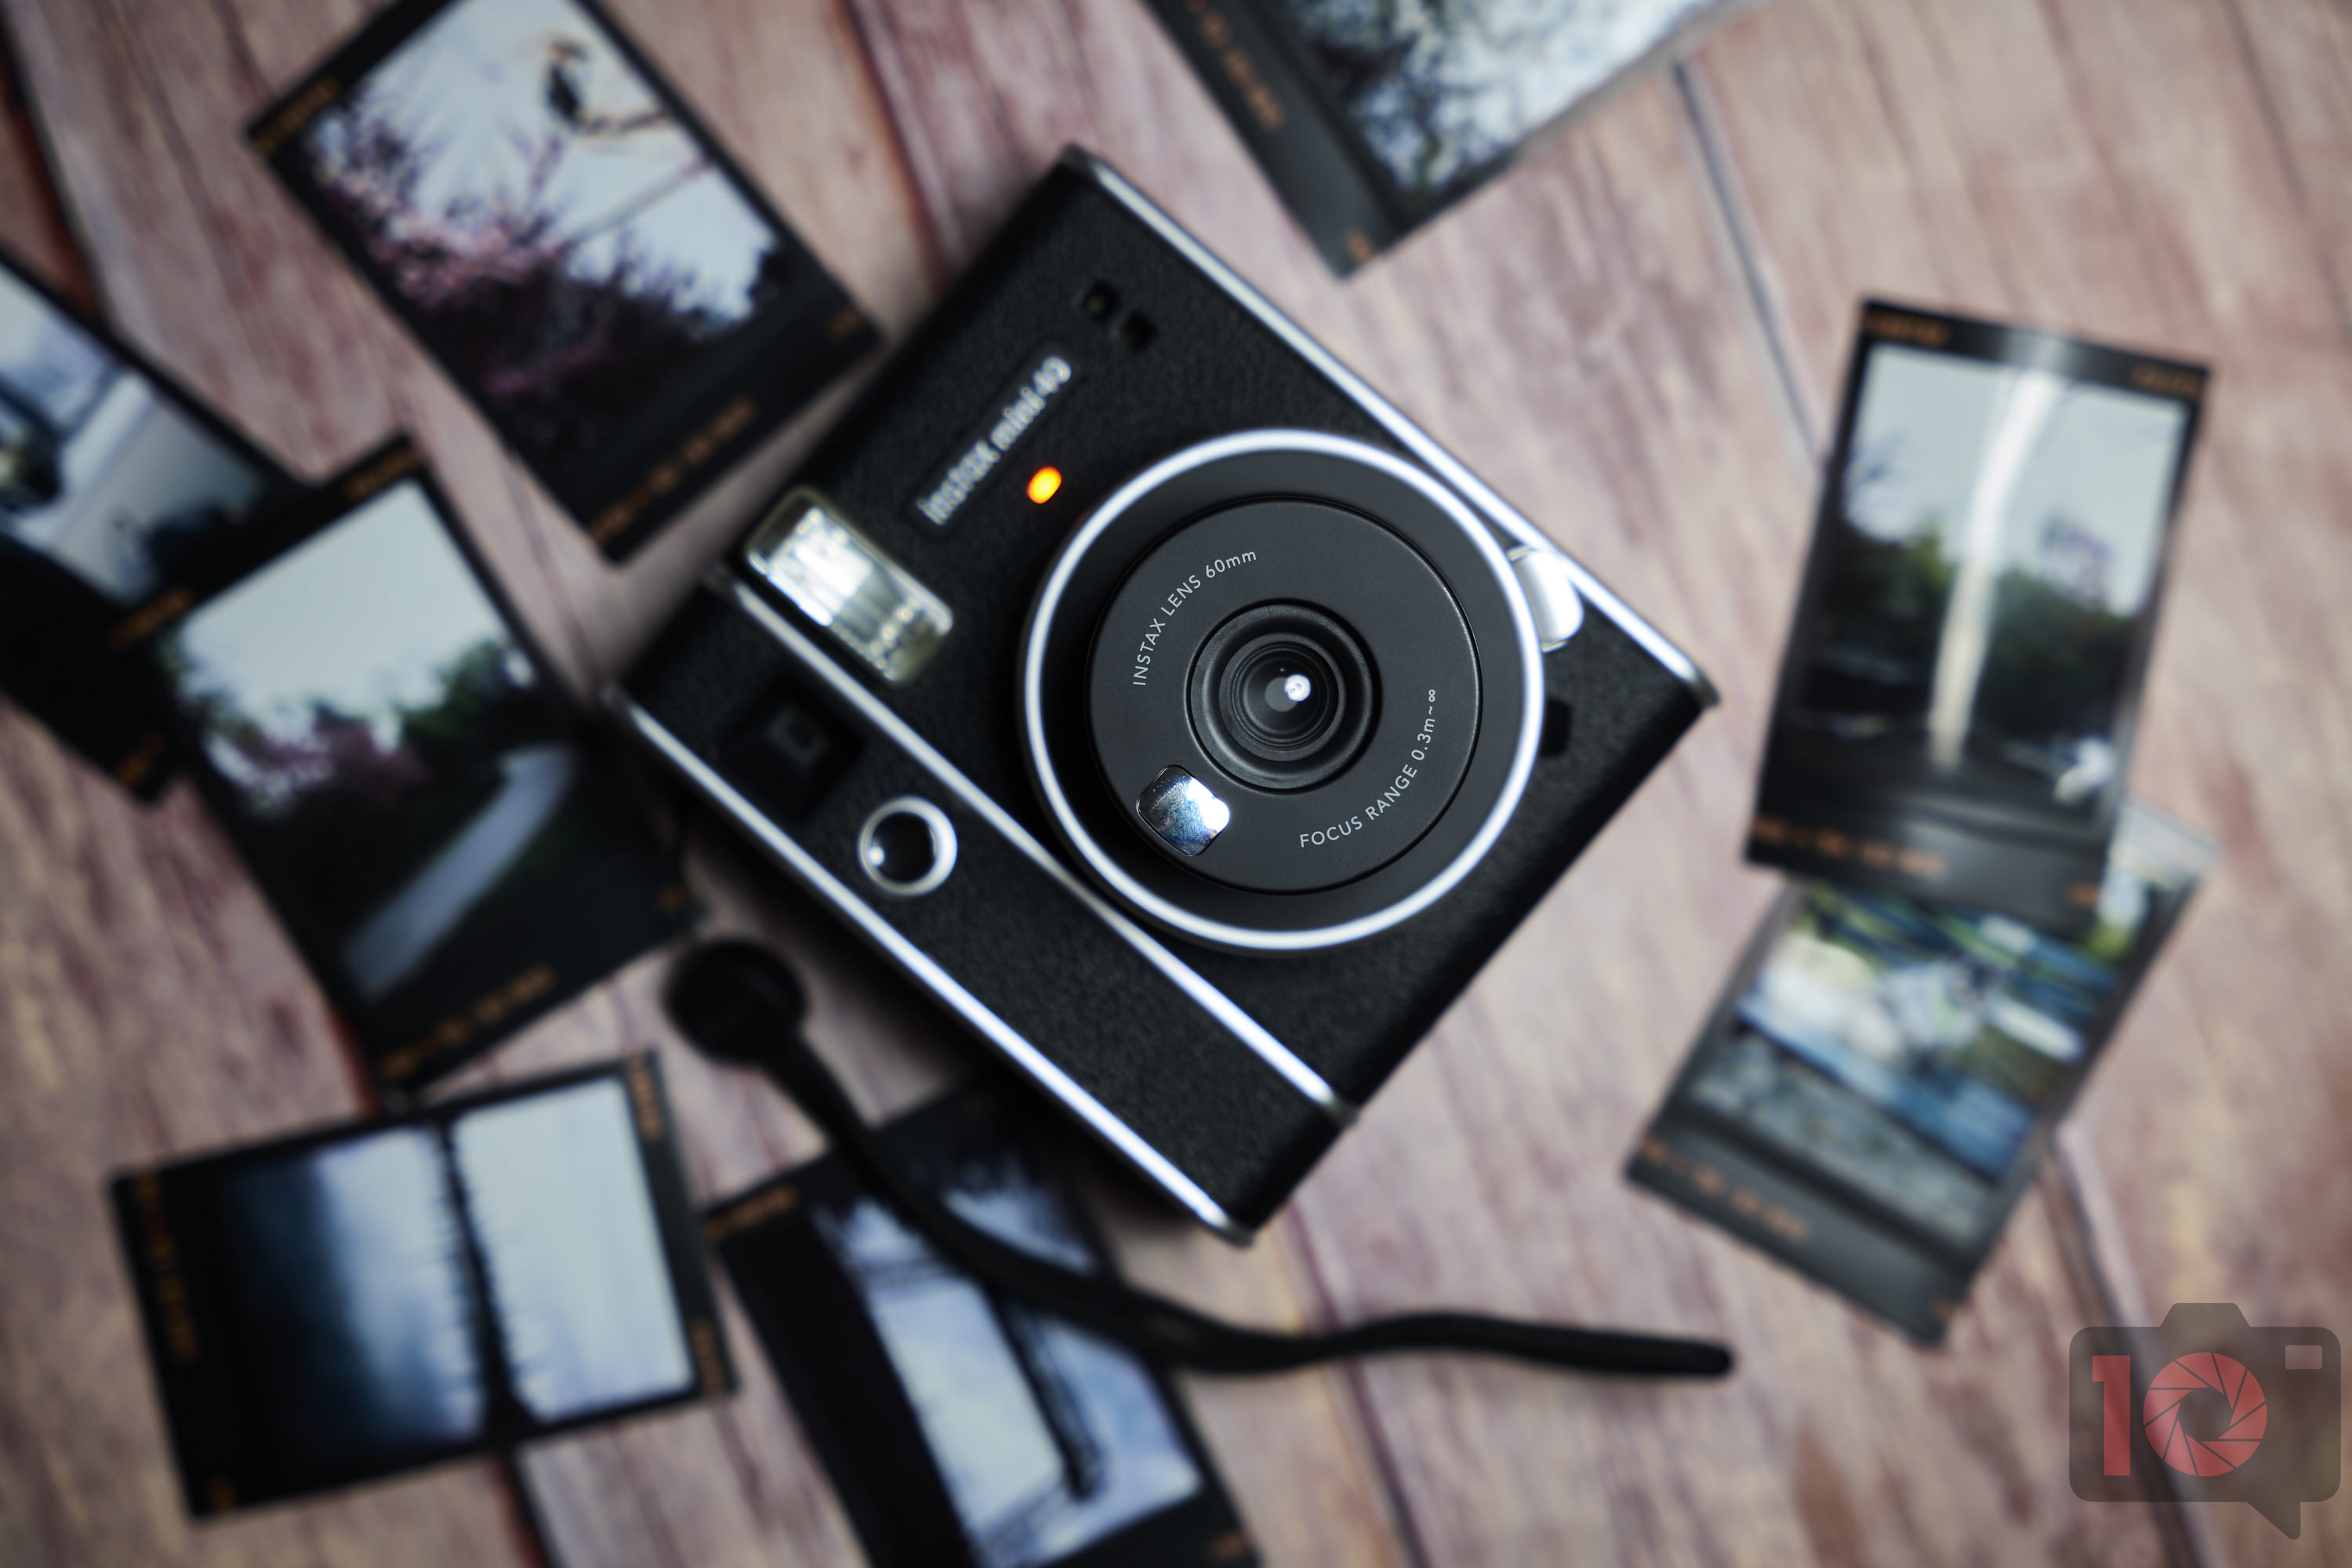 Instax Mini 9 Camera: FEATURES, REVIEW, PHOTOS